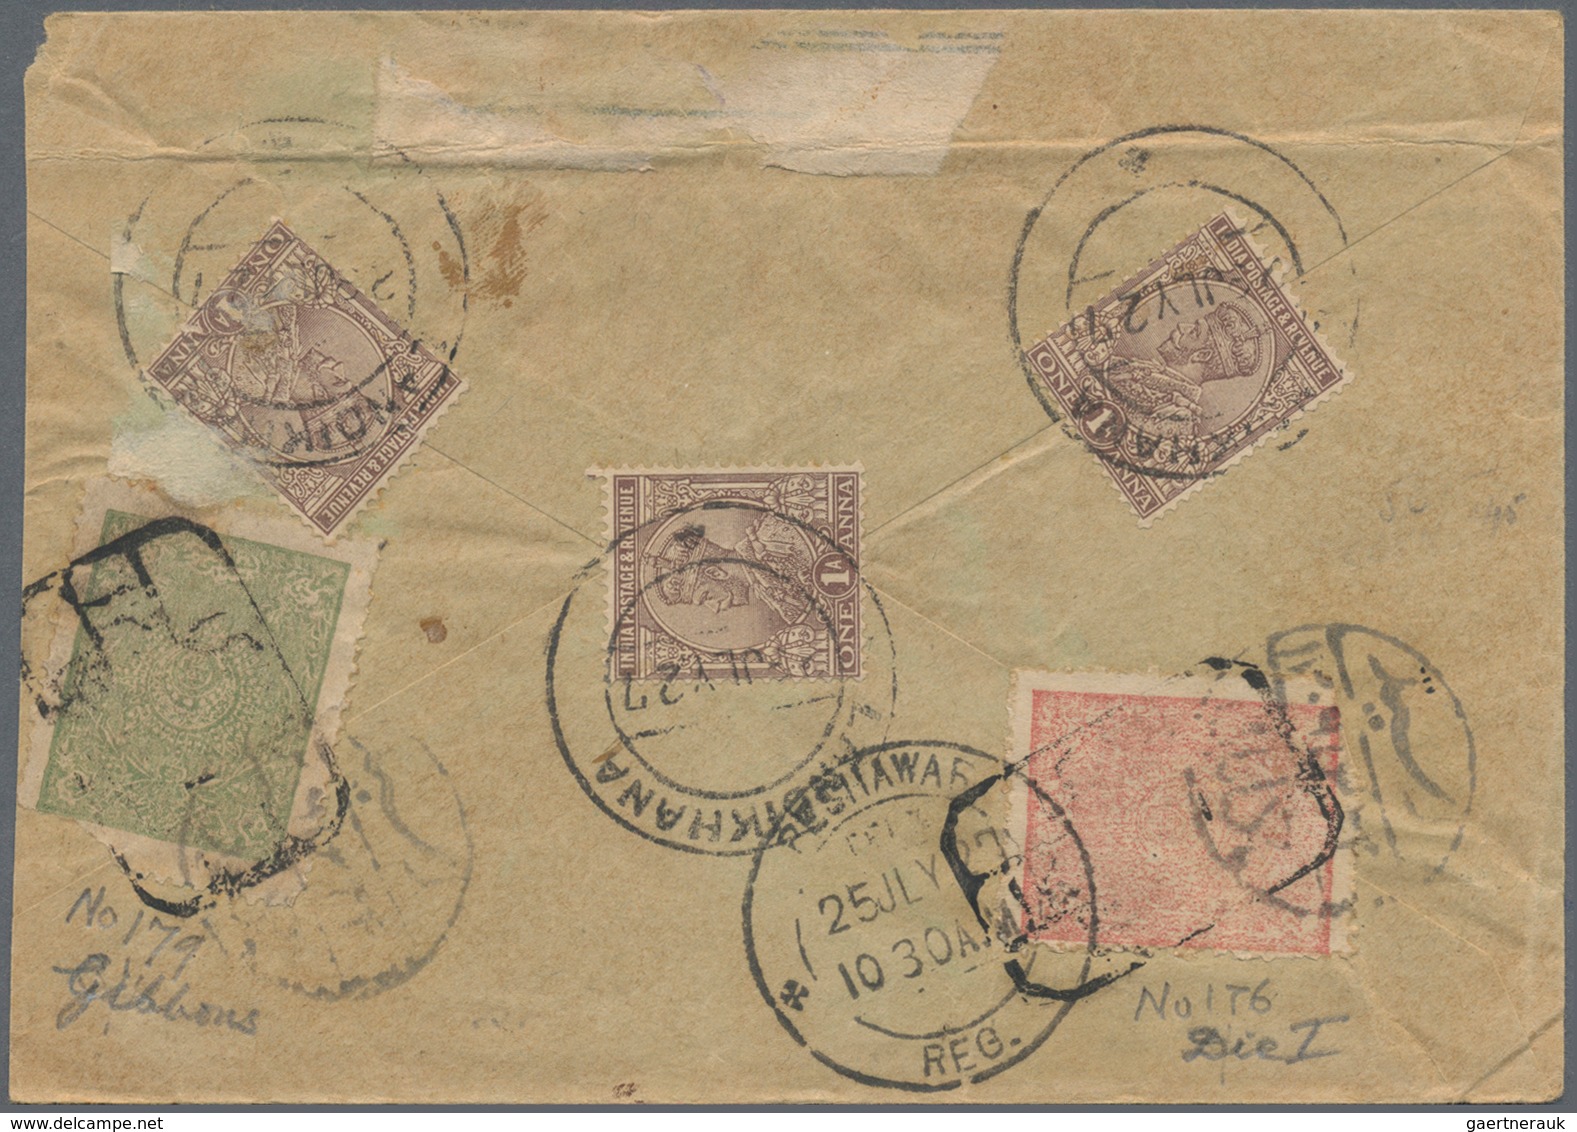 Afghanistan: 1871-1932, Collection of 44 covers, or parts of covers, and postal stationery items, mo